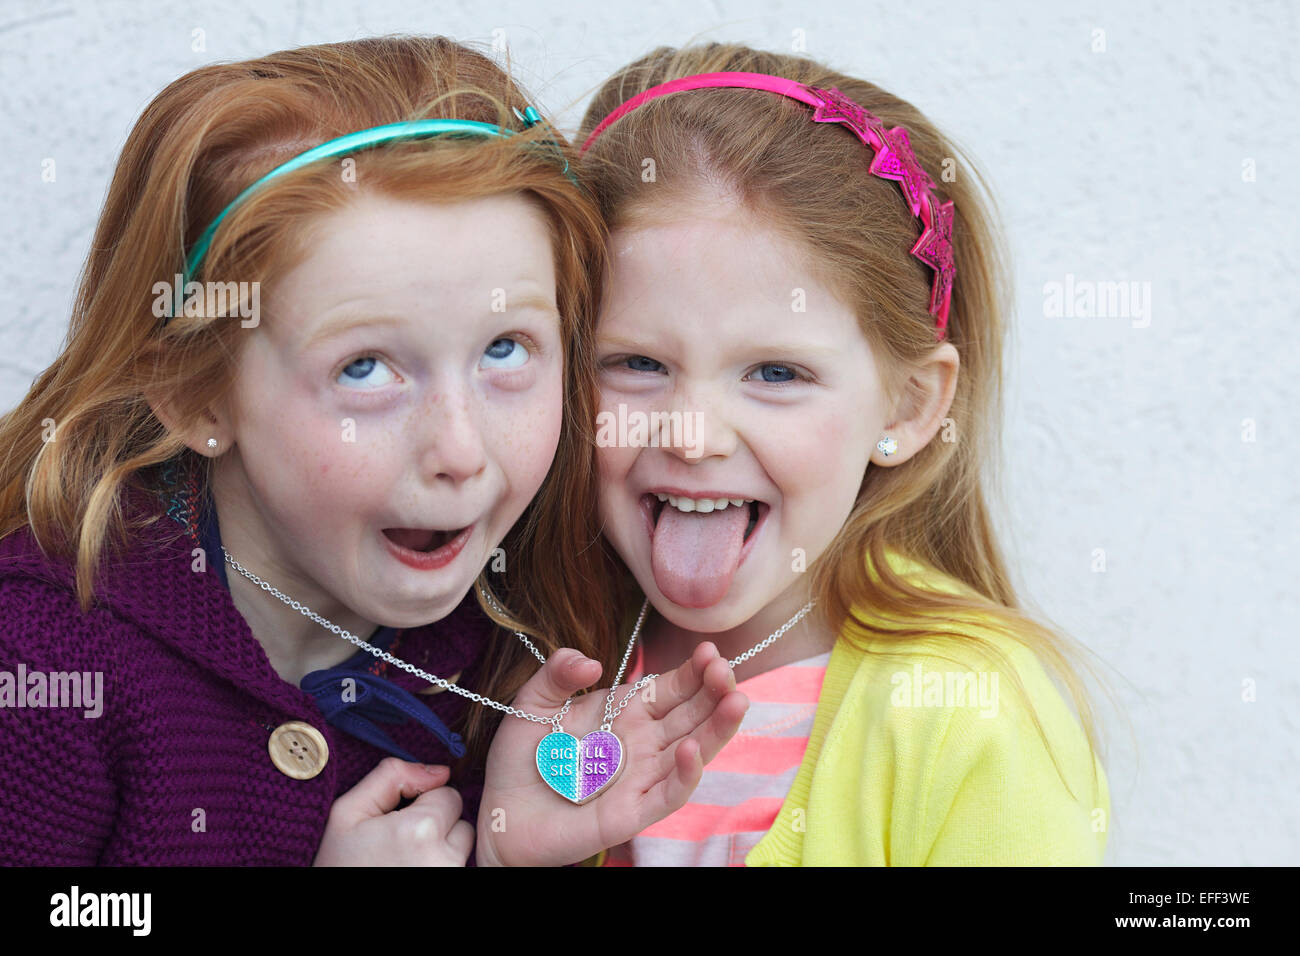 Two sisters with red hair acting silly together. Stock Photo